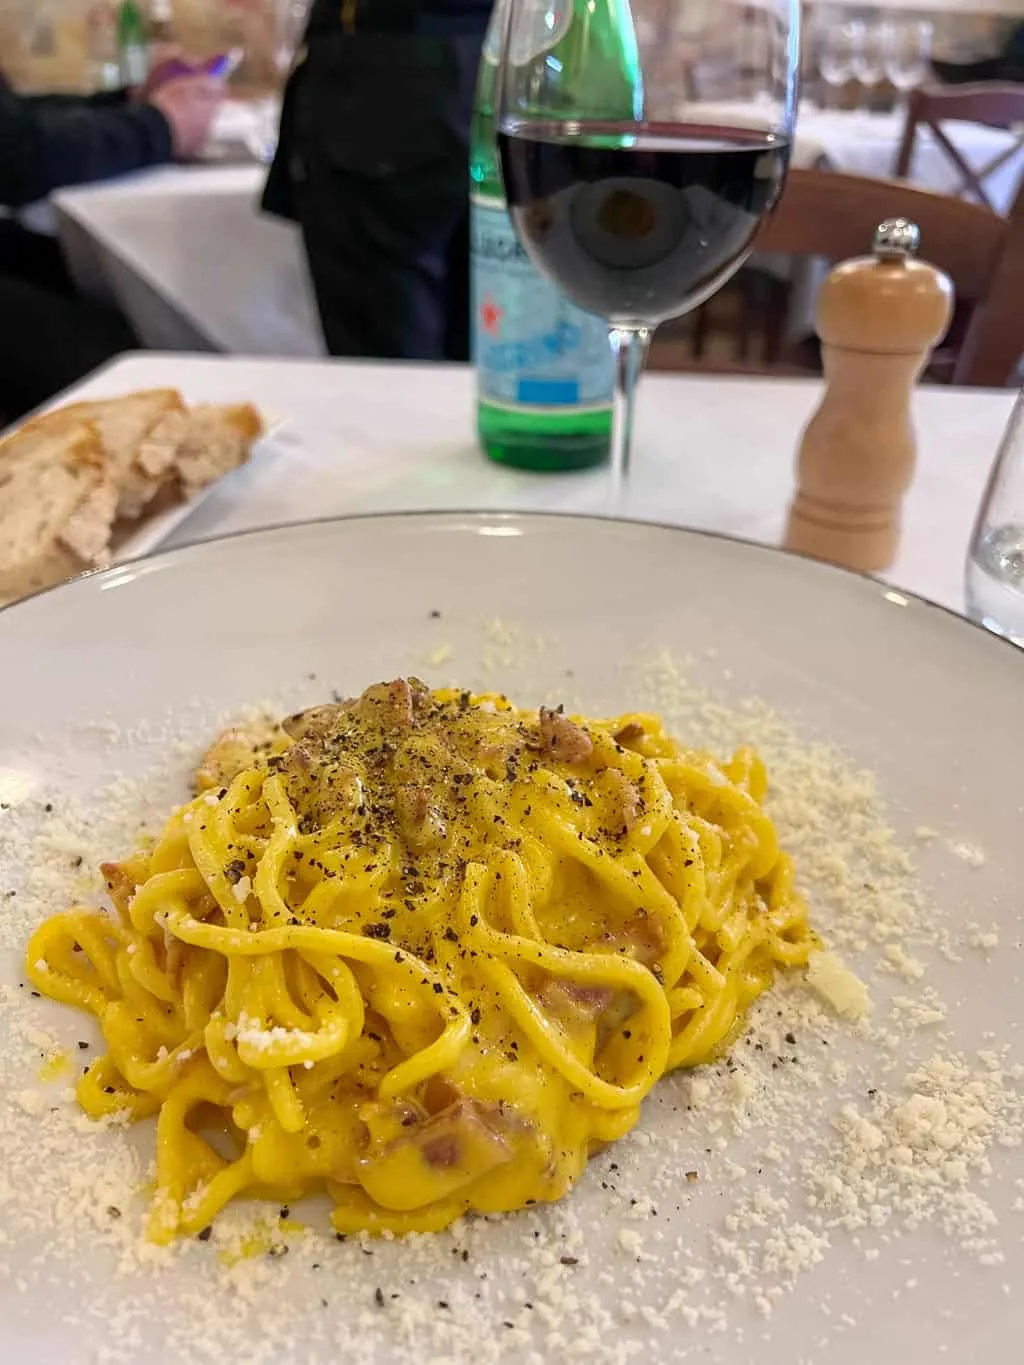 A plate of traditional carbonara pasta with a glass of red wine in a restaurant in Rome.